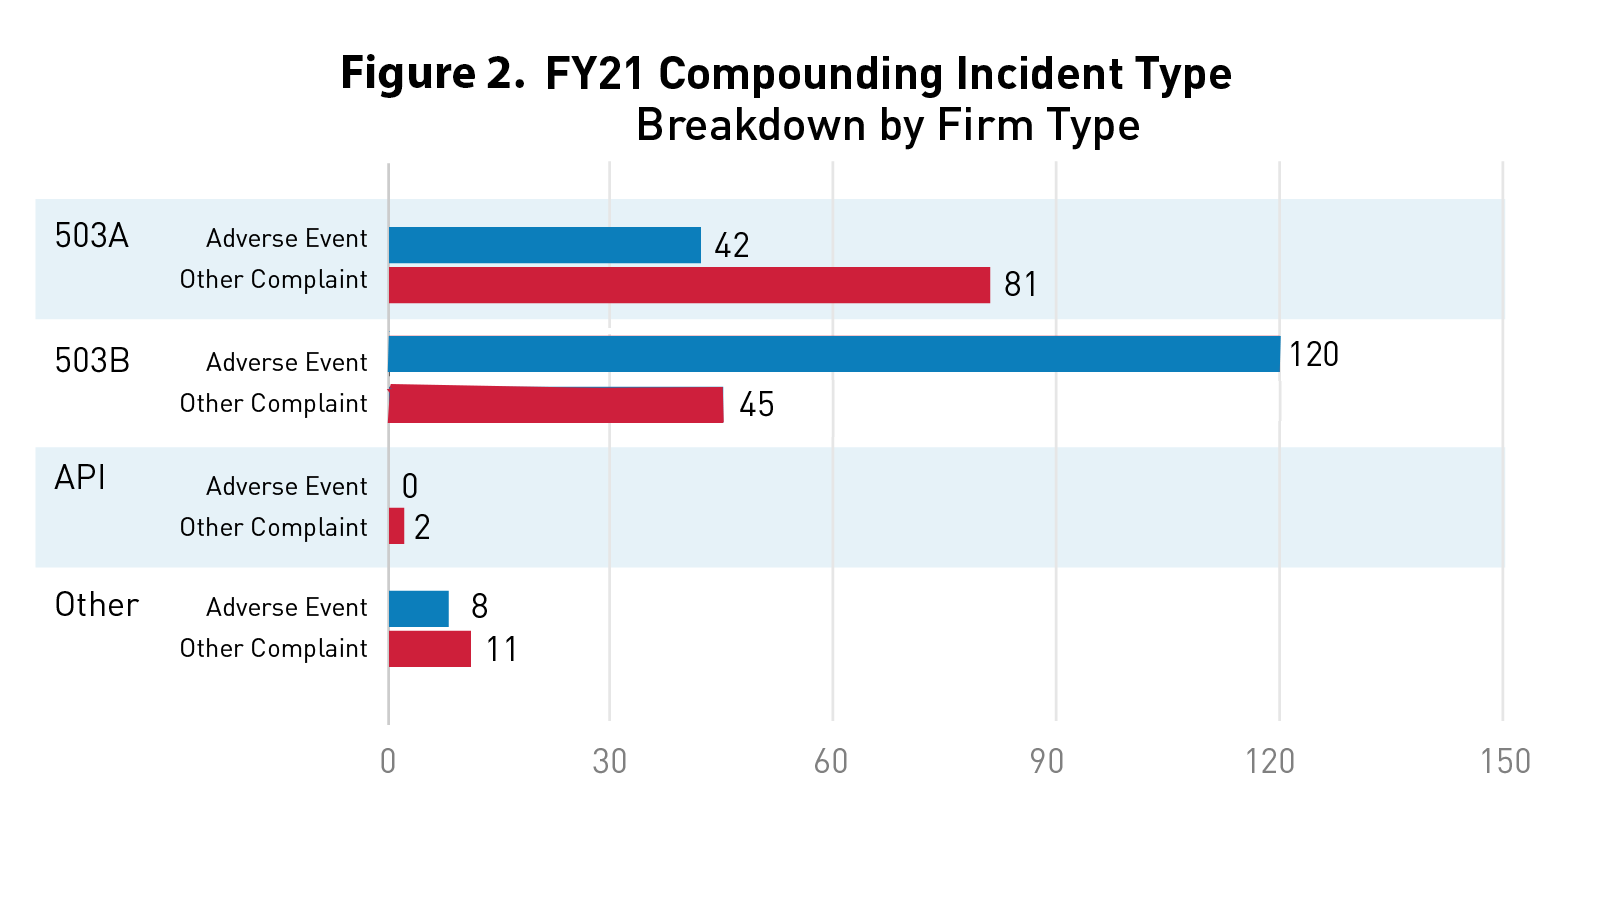 Figure 2: Compounding Incident Type